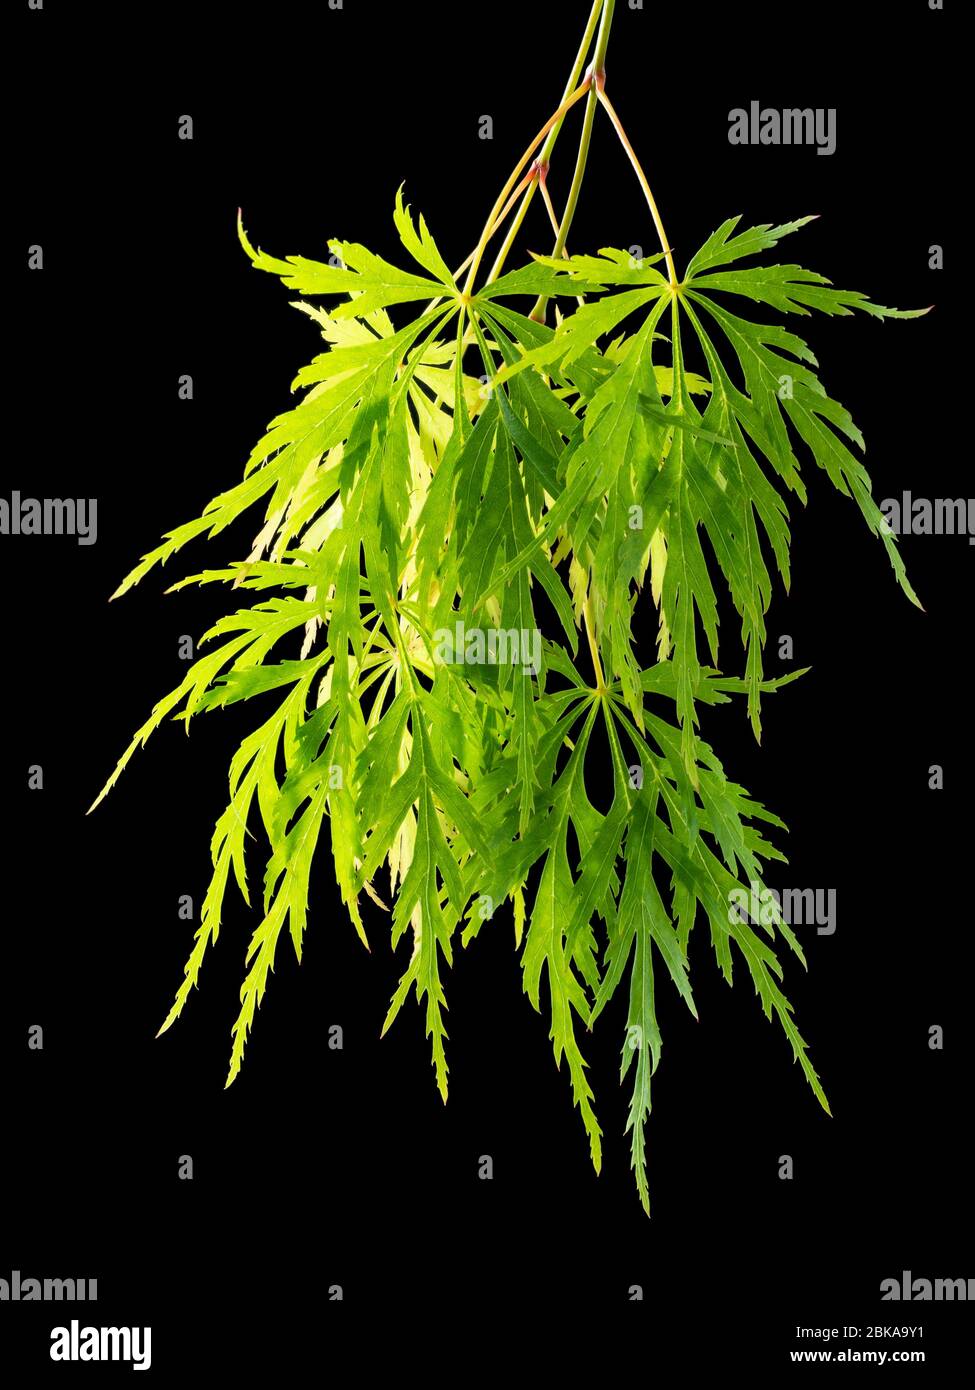 Backlit dissected green leaves of the hardy mounding Japanese maple, Acer palmatum dissectum, on a black background Stock Photo